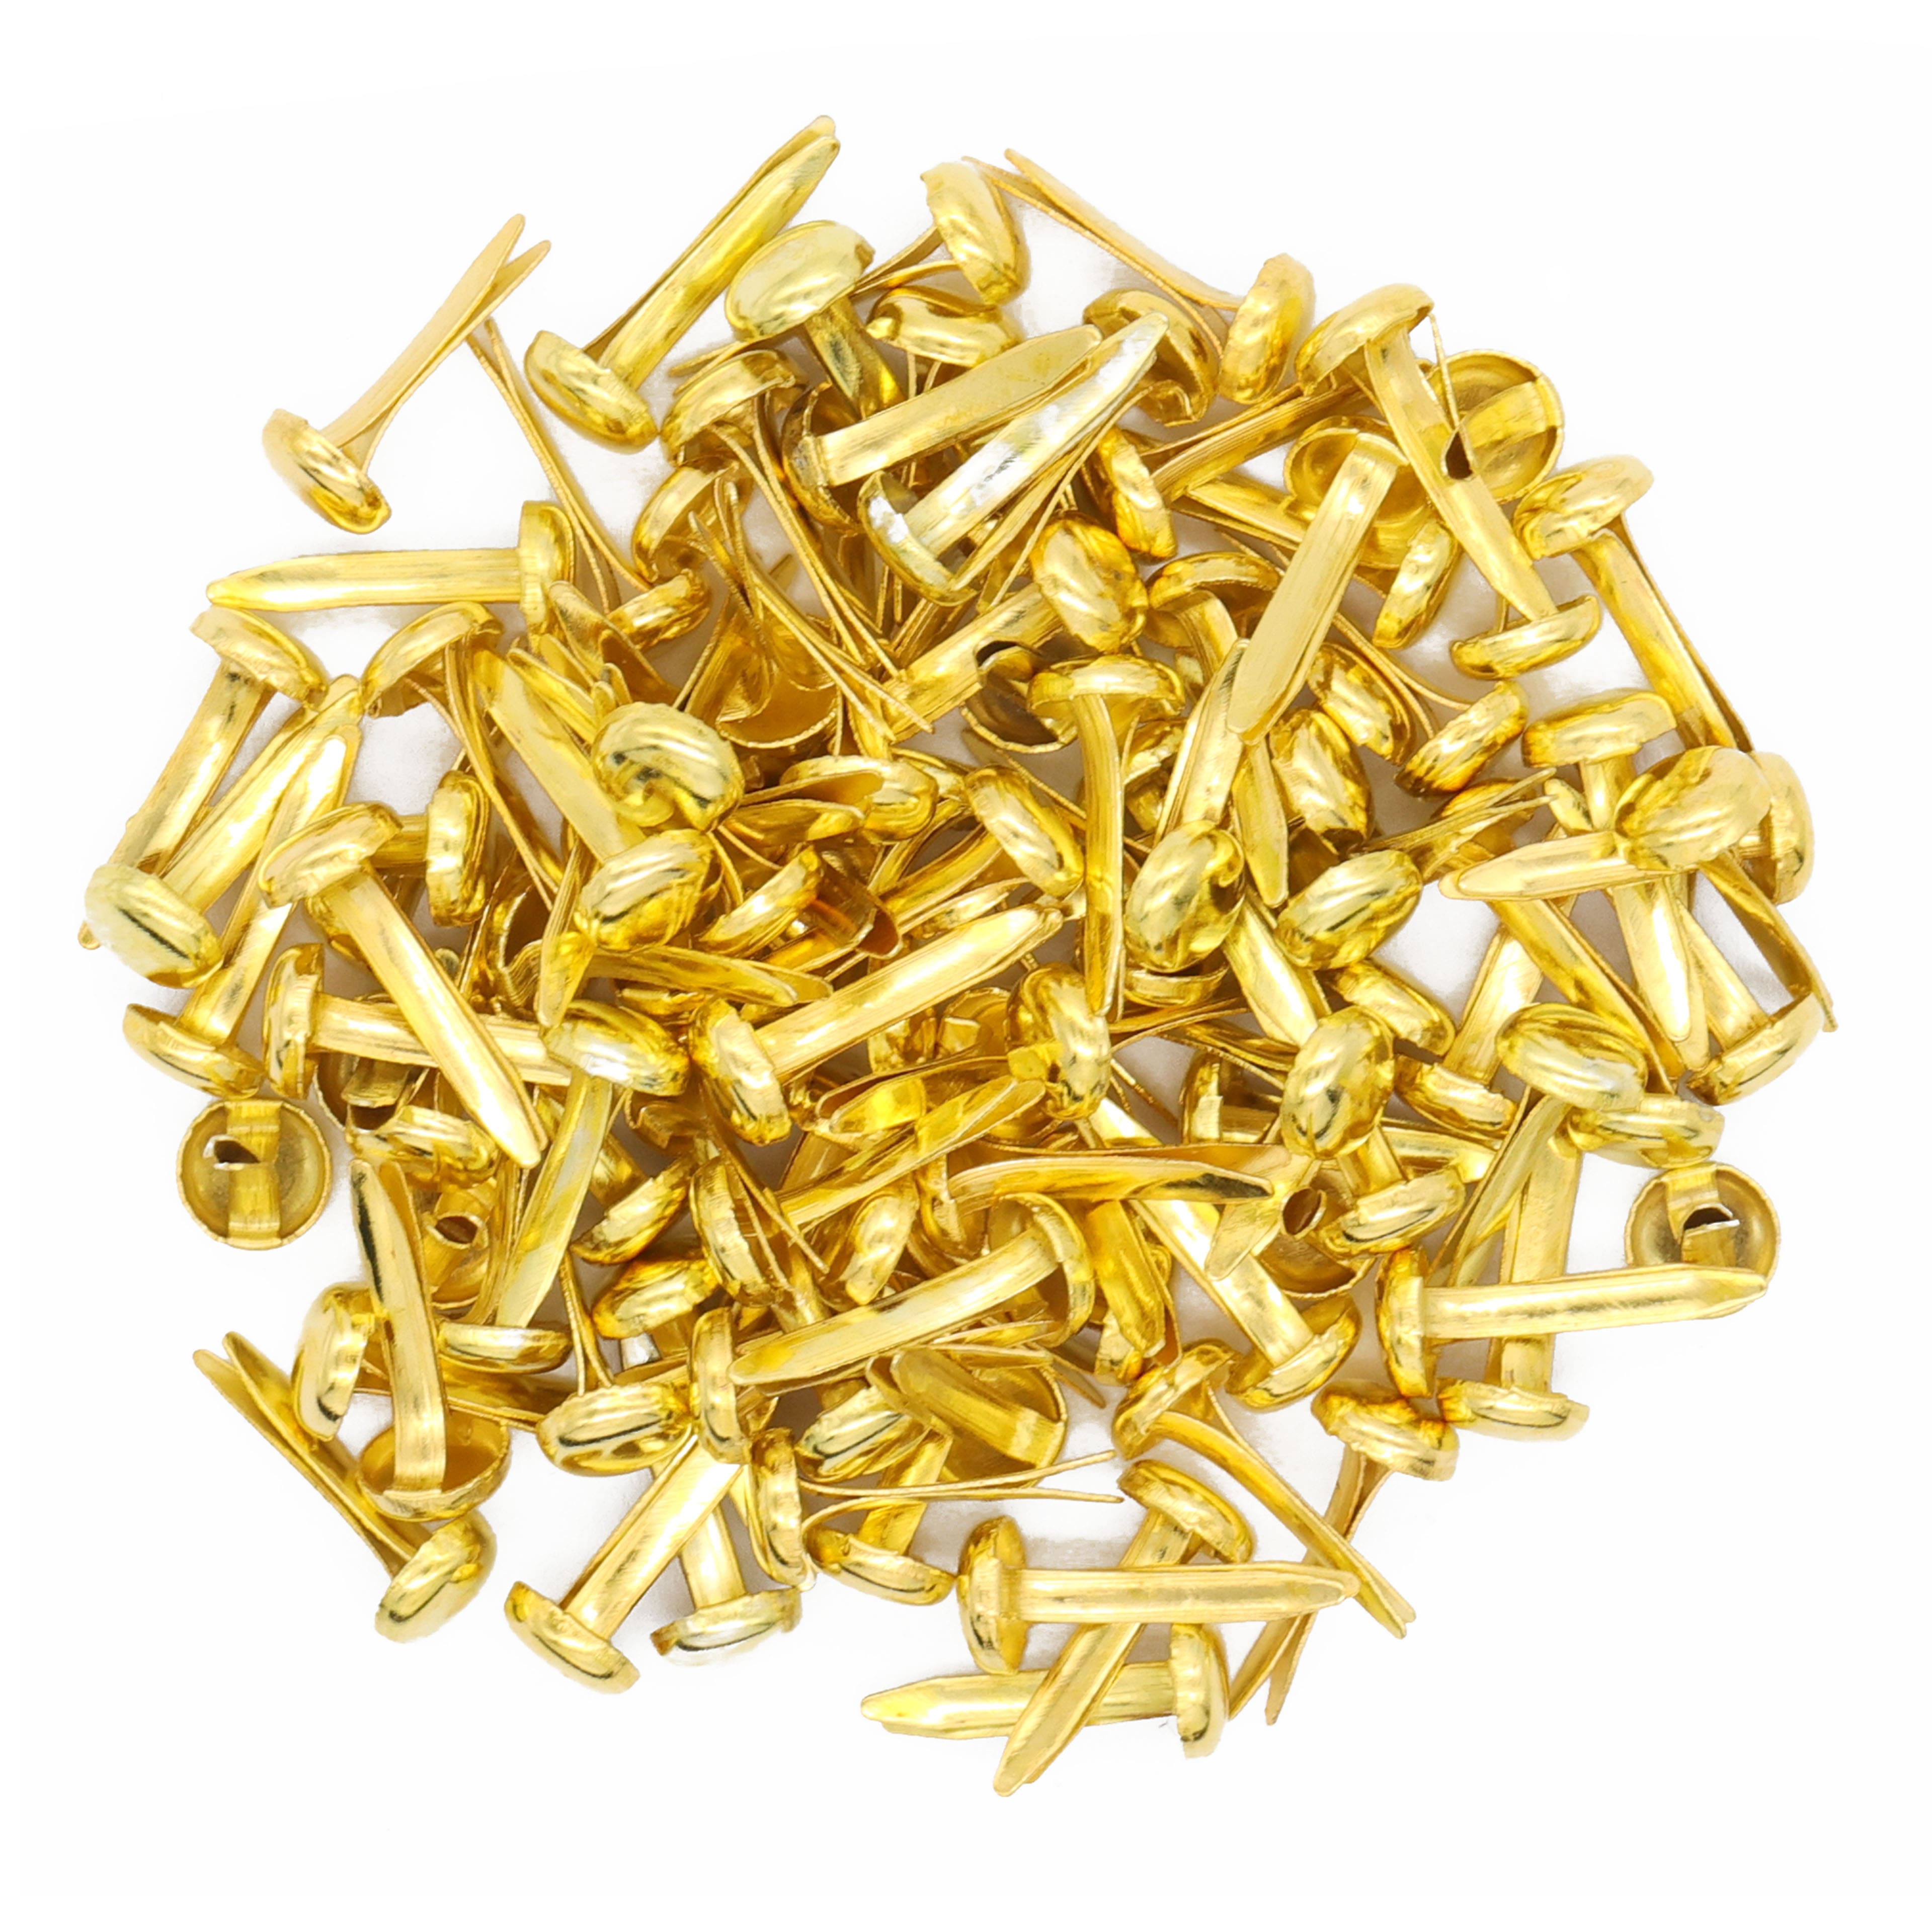 Picture Frame Backing Clips Brass 1 with Screws Large Size 100 Pack -  Retaining Clips For Picture